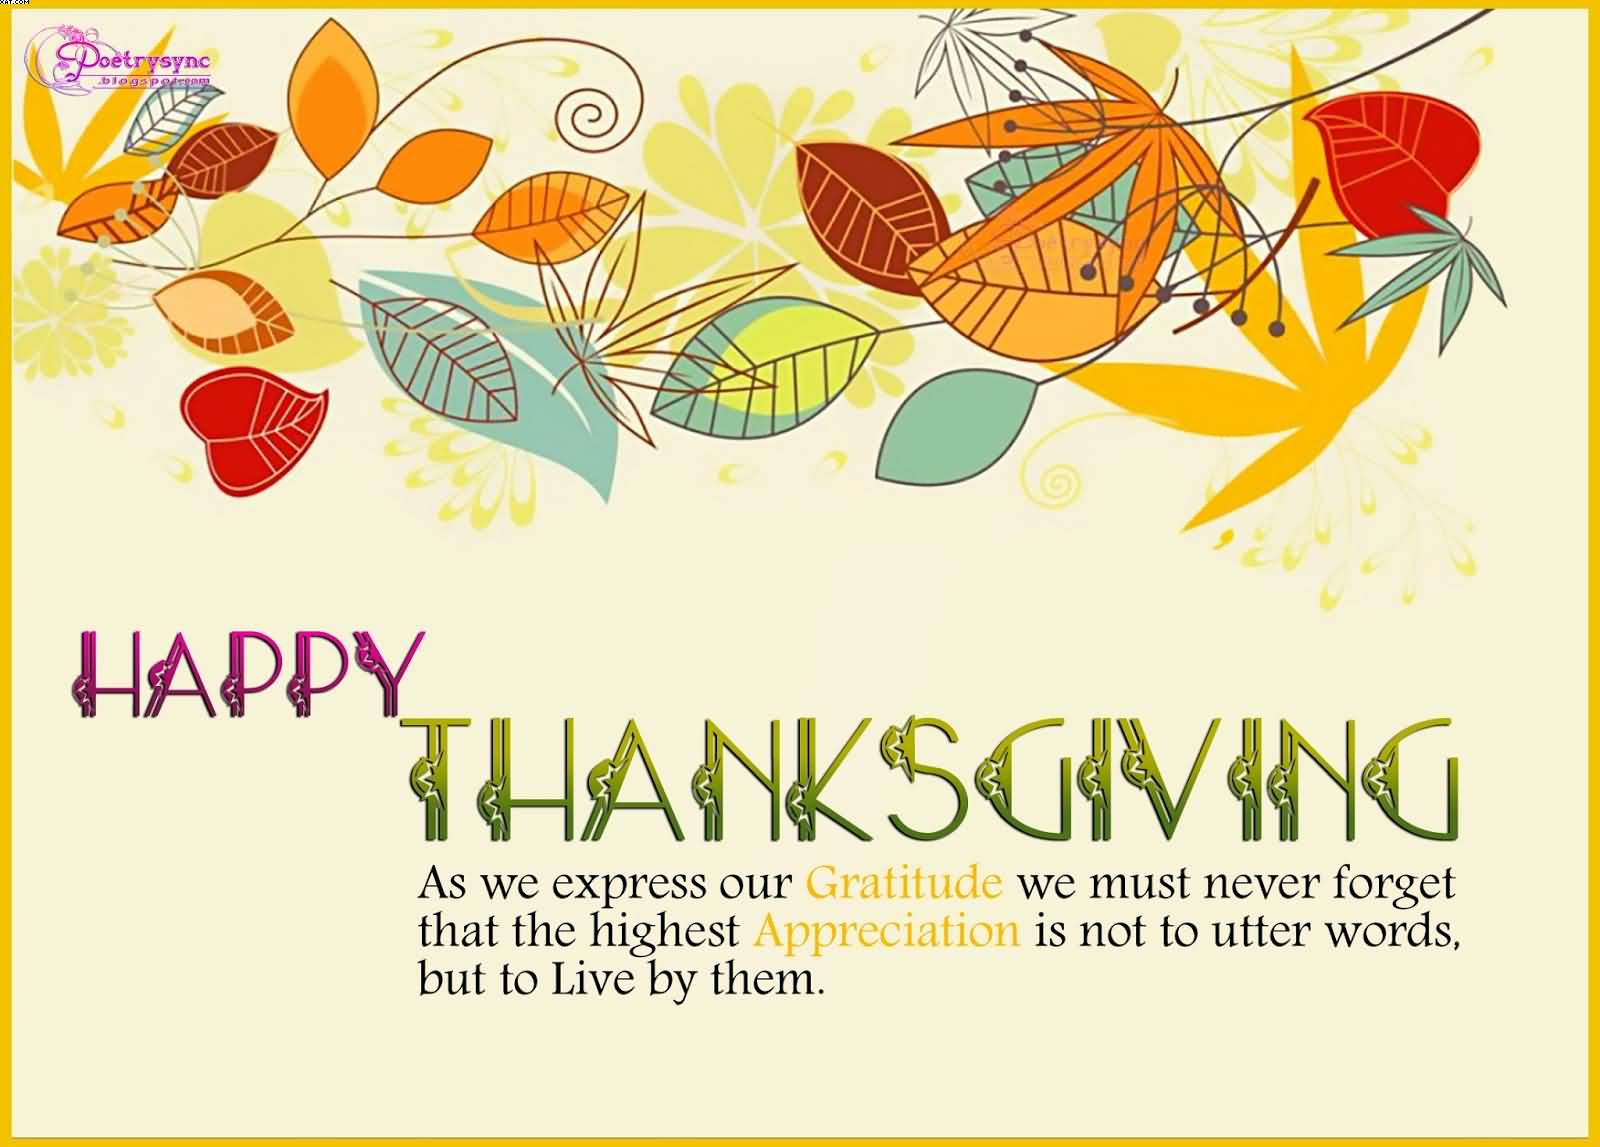 Happy Thanksgiving wishes wallpaper